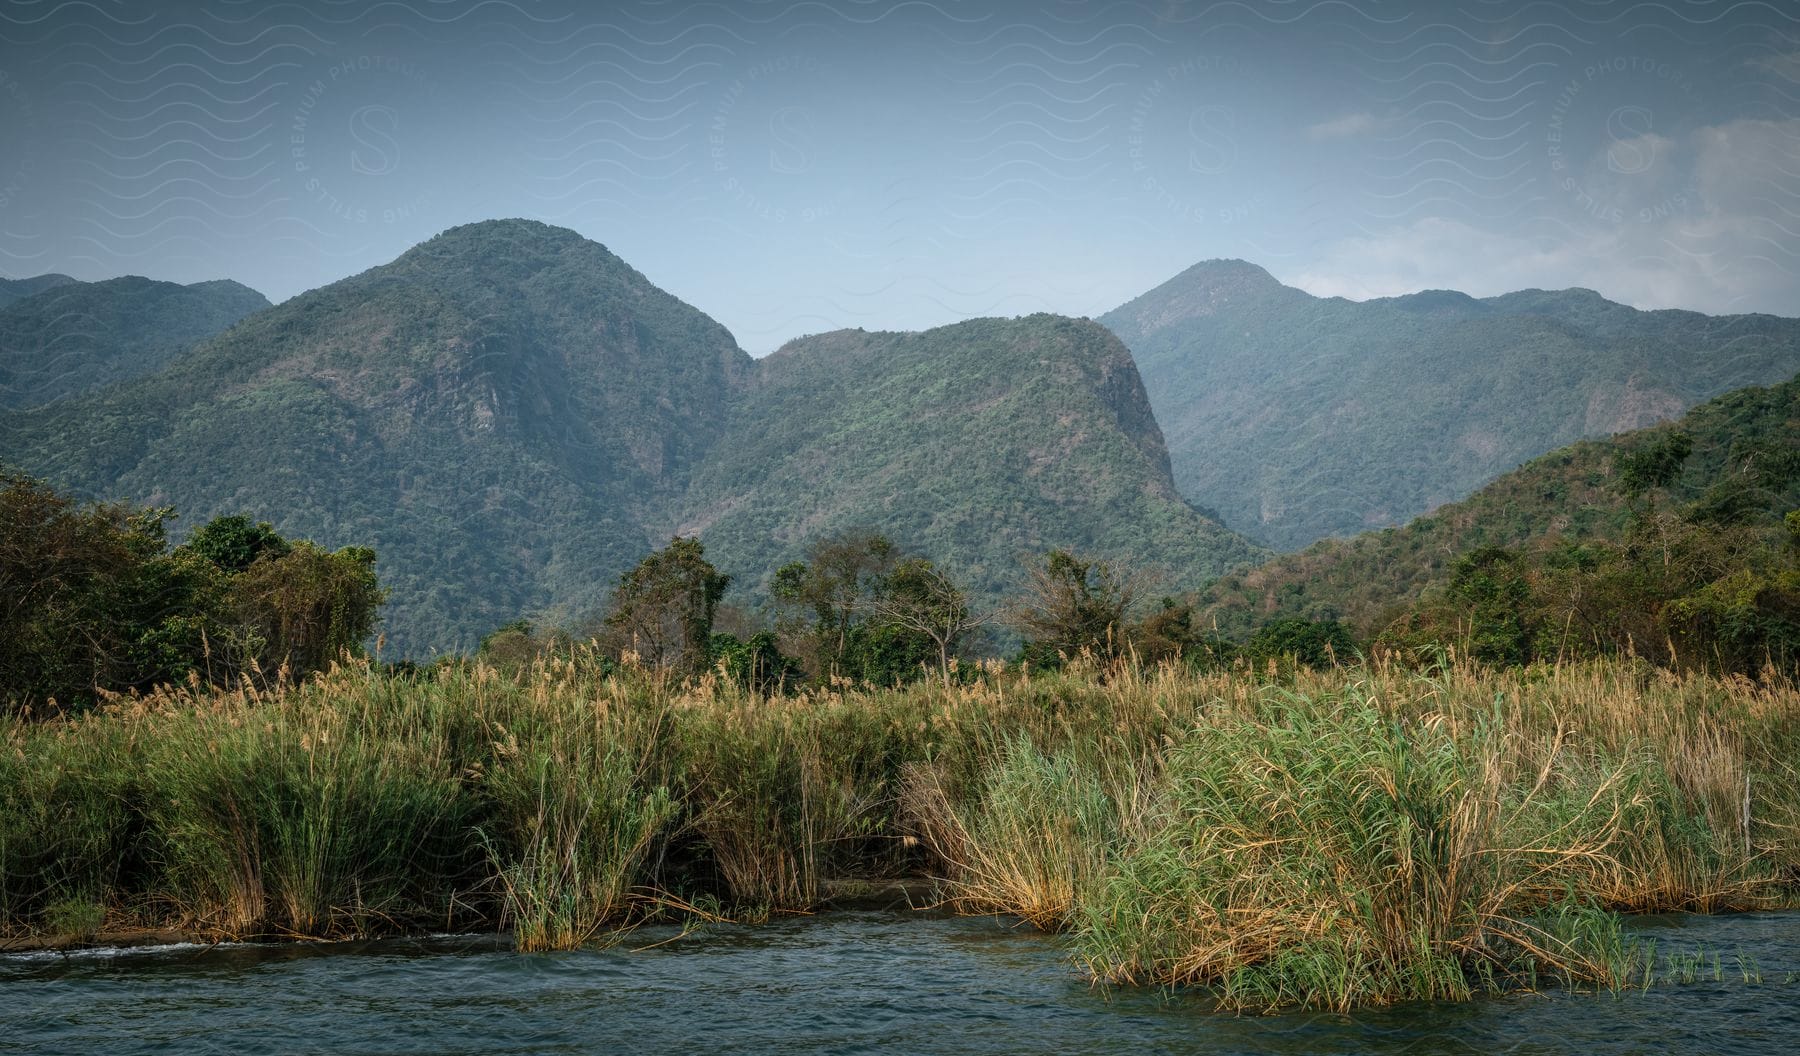 Mountains looming over a lush river landscape with dense reeds and shrubs in the foreground.